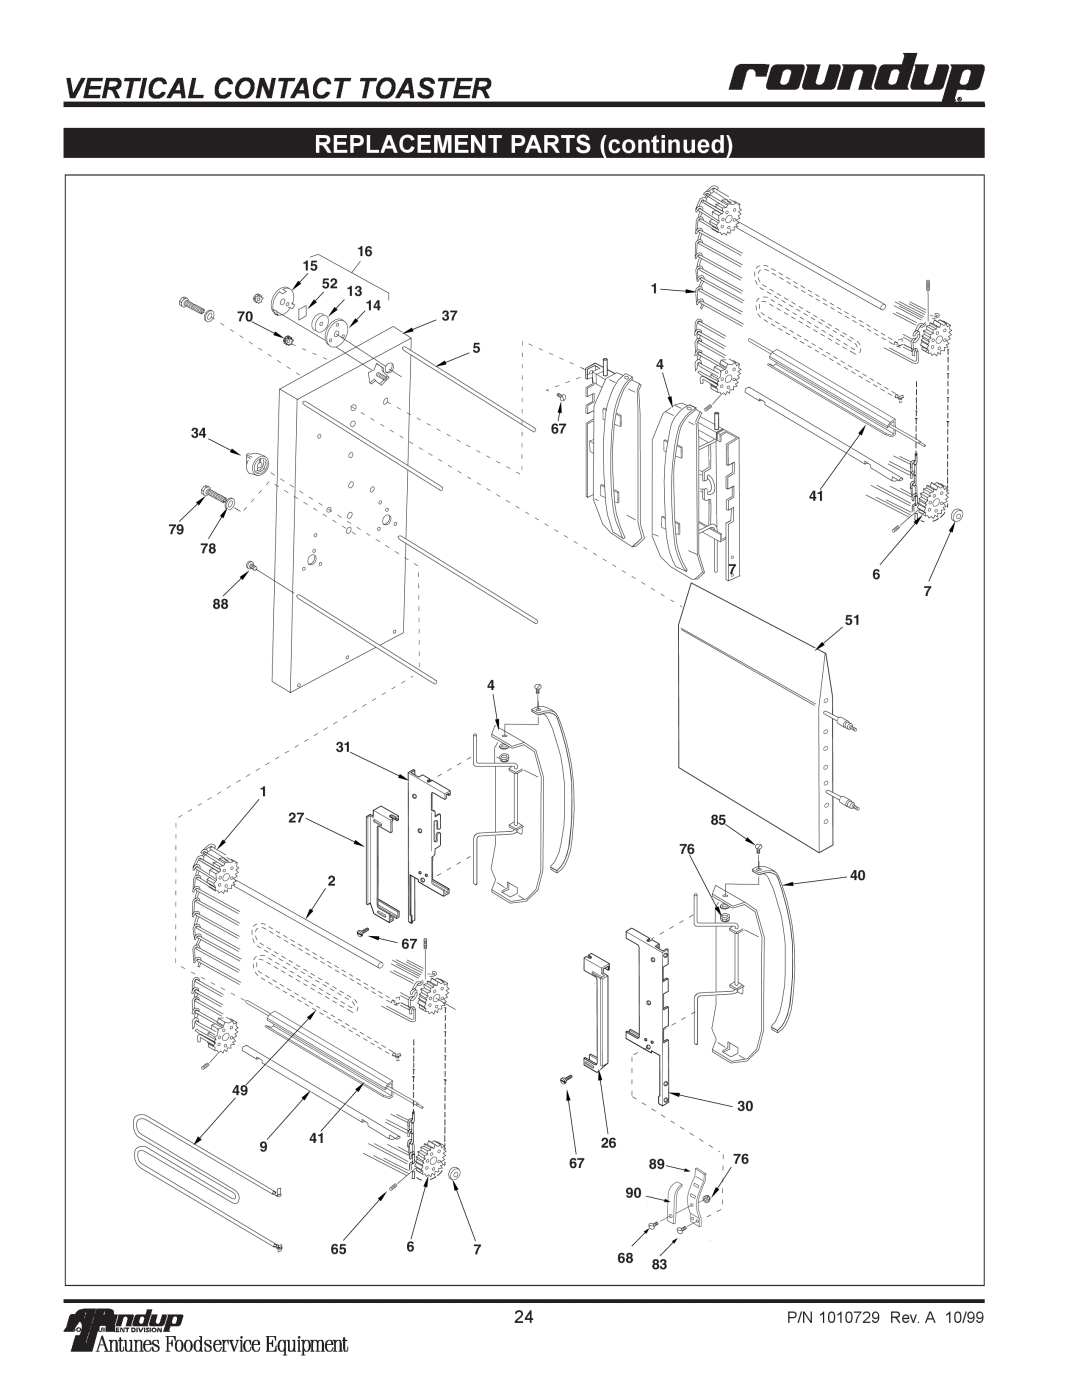 Antunes, AJ VCT-20, VCT-50, VCT-25 owner manual Vertical Contact Toaster, REPLACEMENT PARTS continued, Rev. A 10/99 